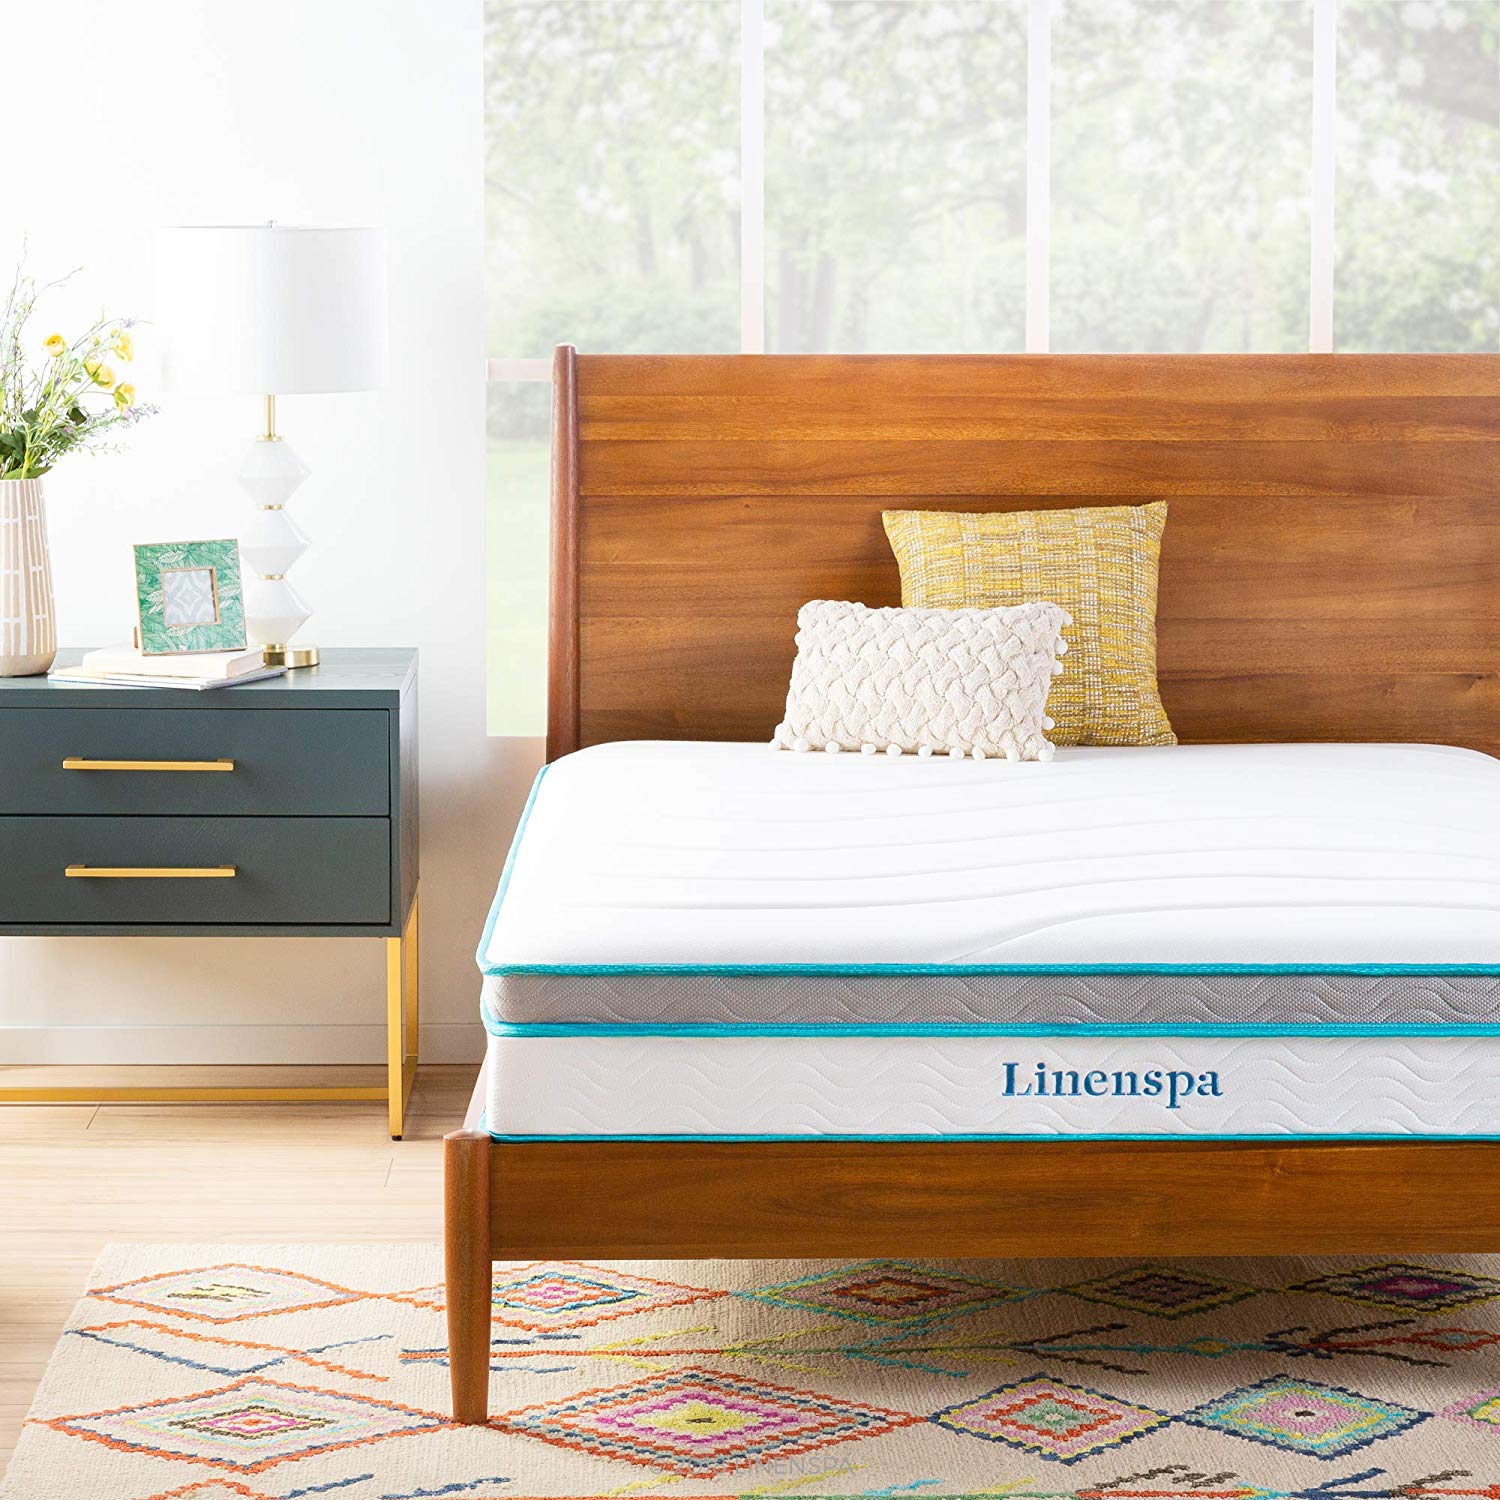 Top 10 Best Mattress Of 2020 Reviews, Price & Buying Guide